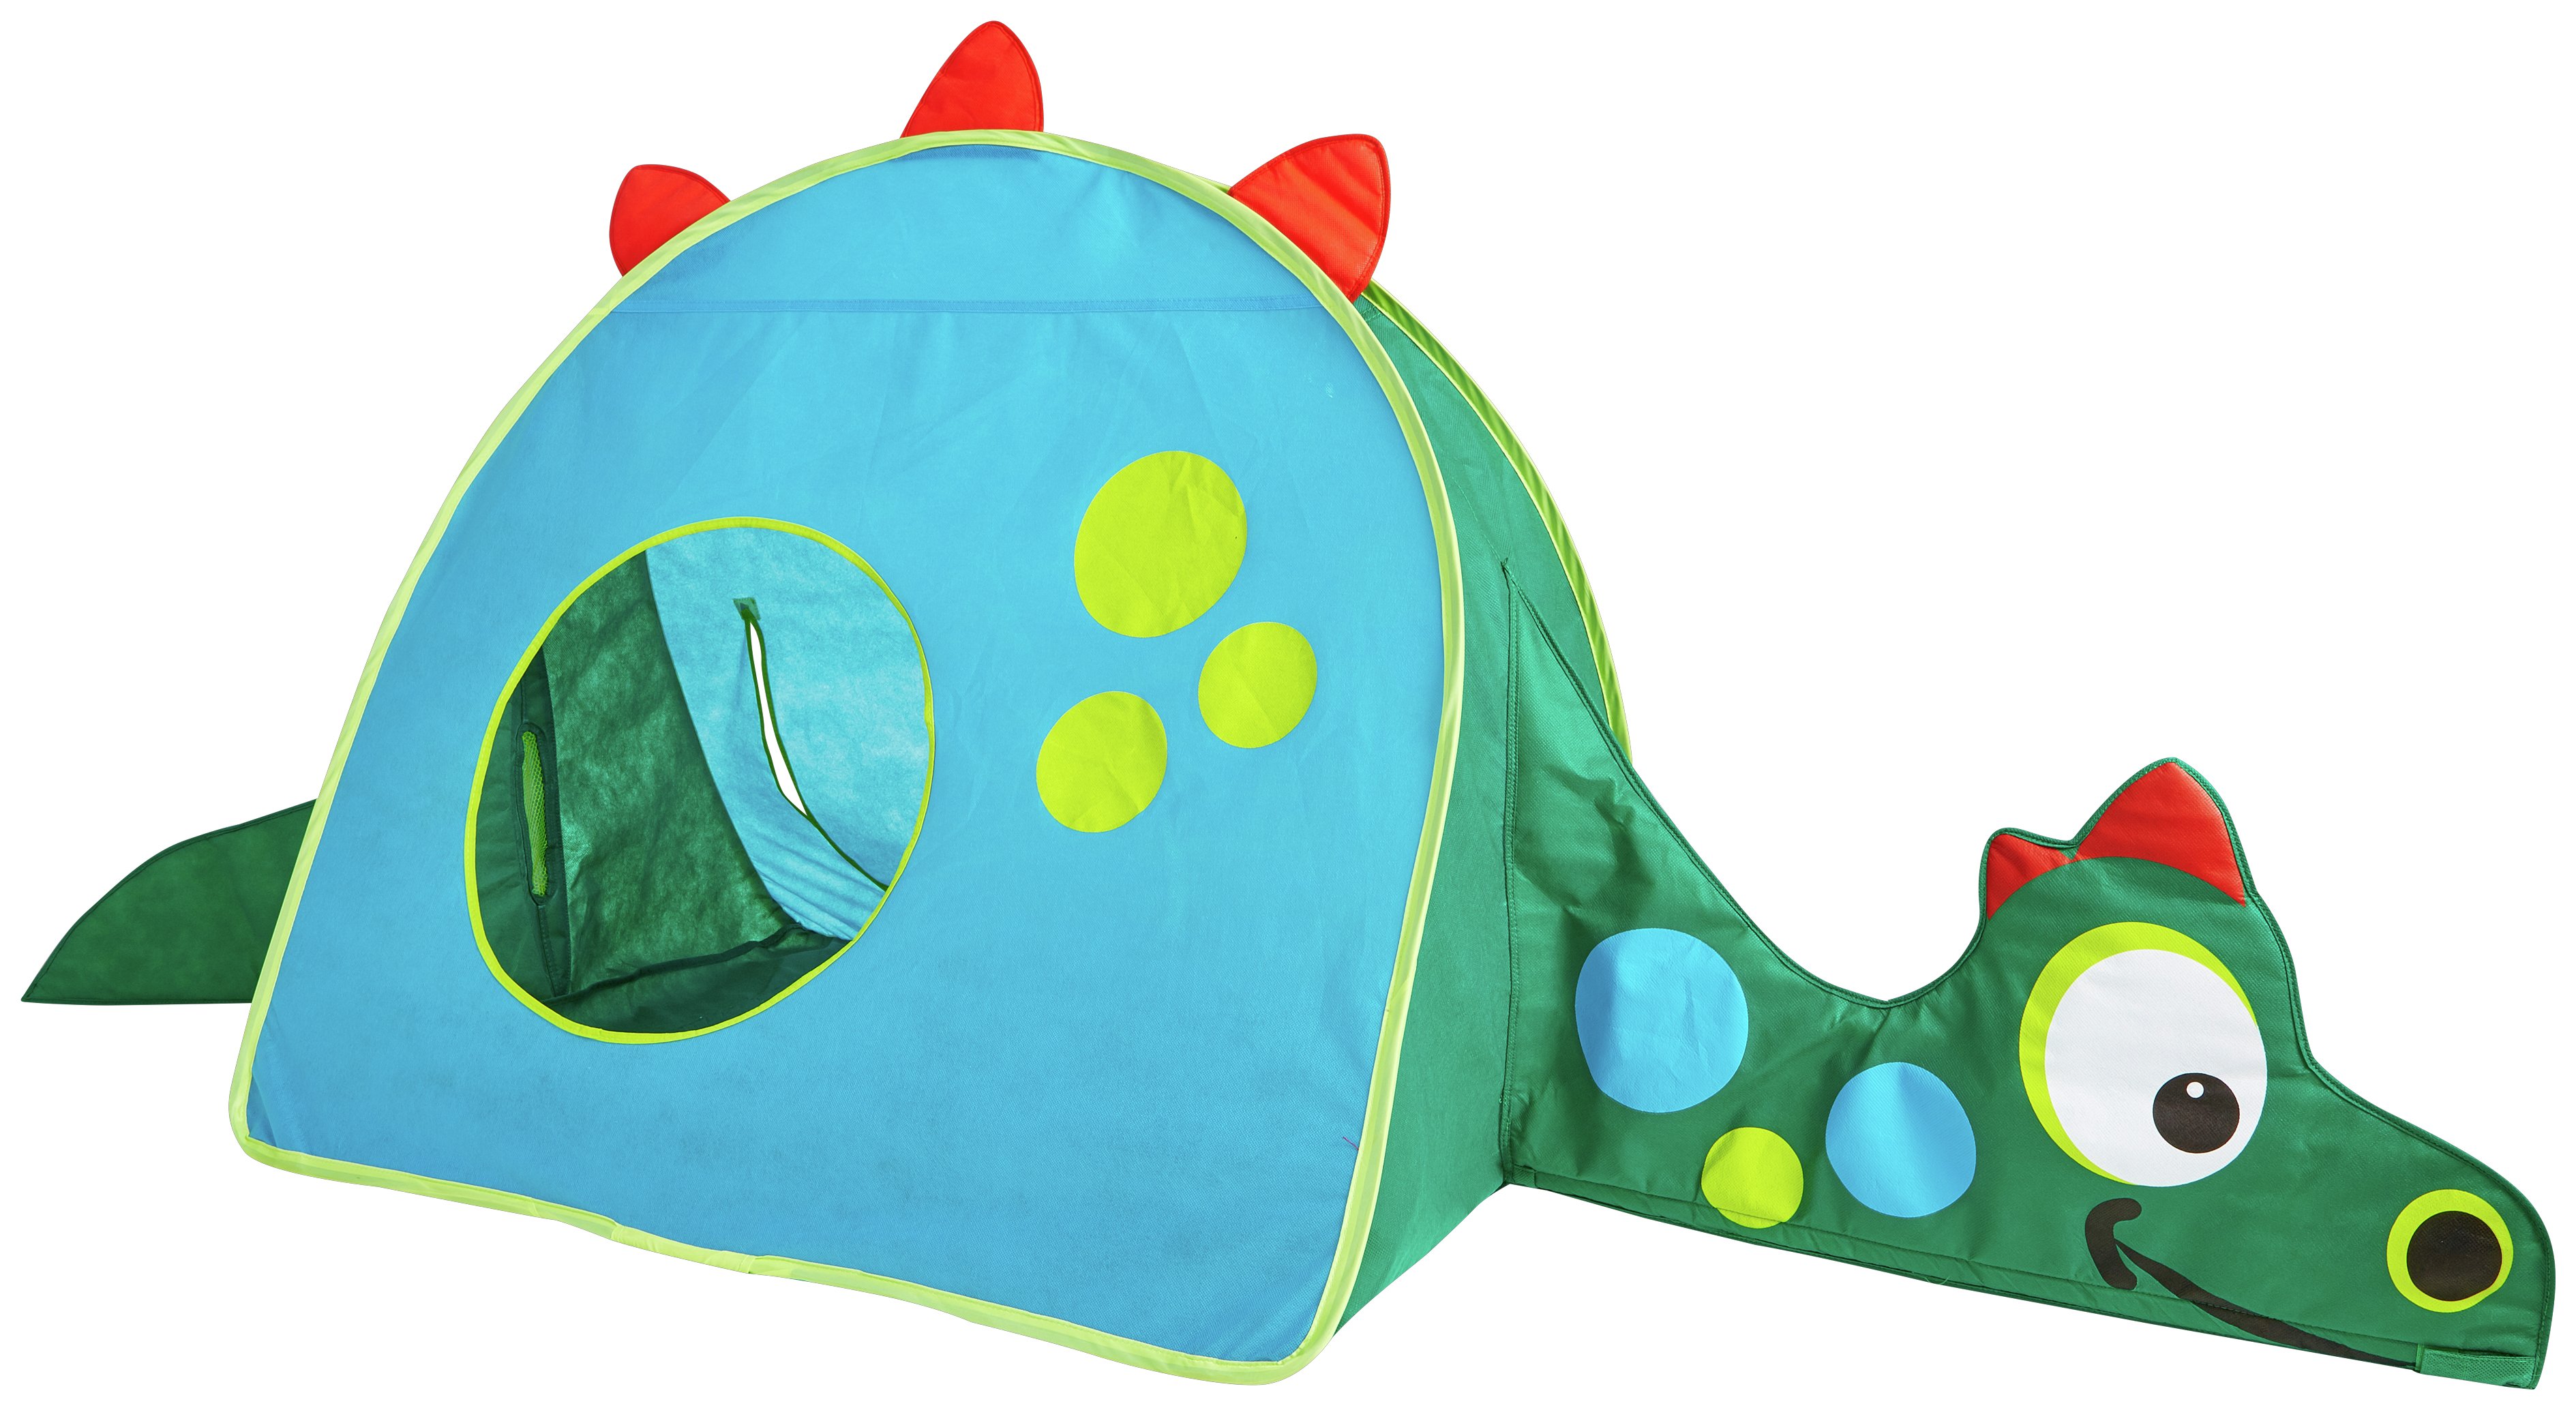 Spongebob Pop Up Tent & Chad Valley Red Pop Up Play Tent At Argos Co Uk Your Sc 1 St Best Tent 2018